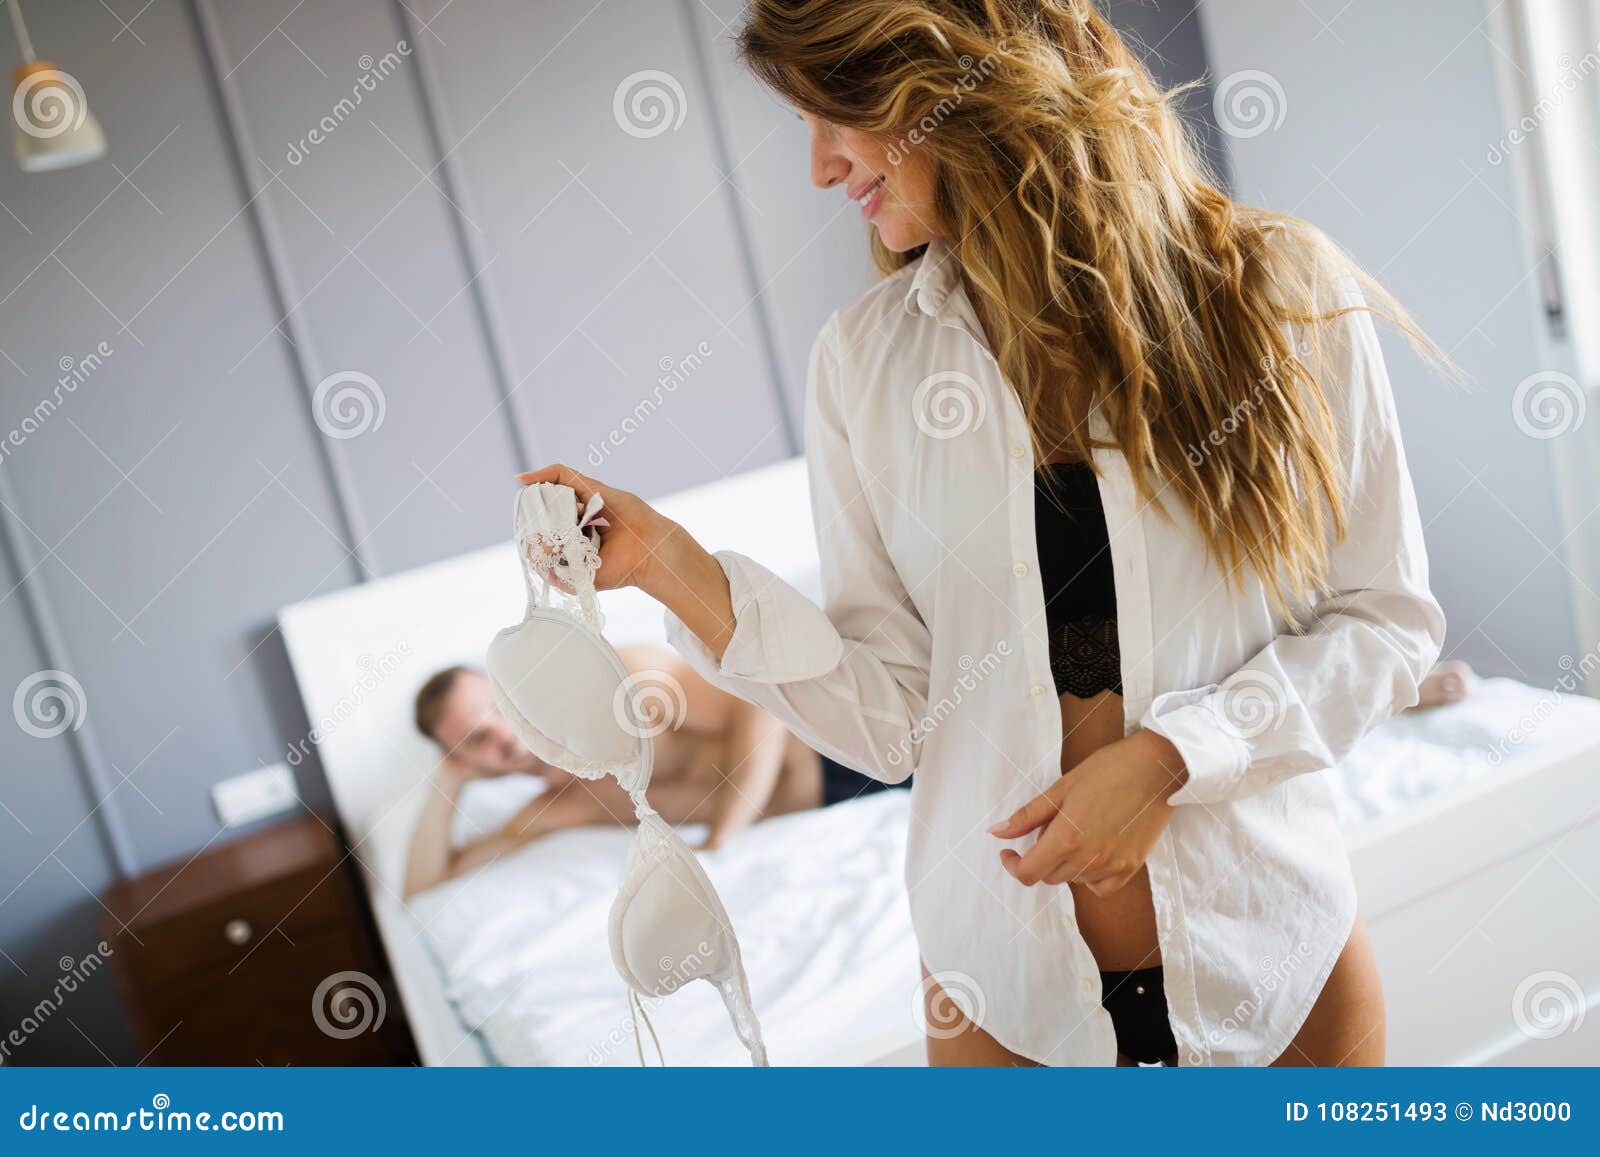 Woman Getting Ready for Sex in Bedroom Stock Image image photo